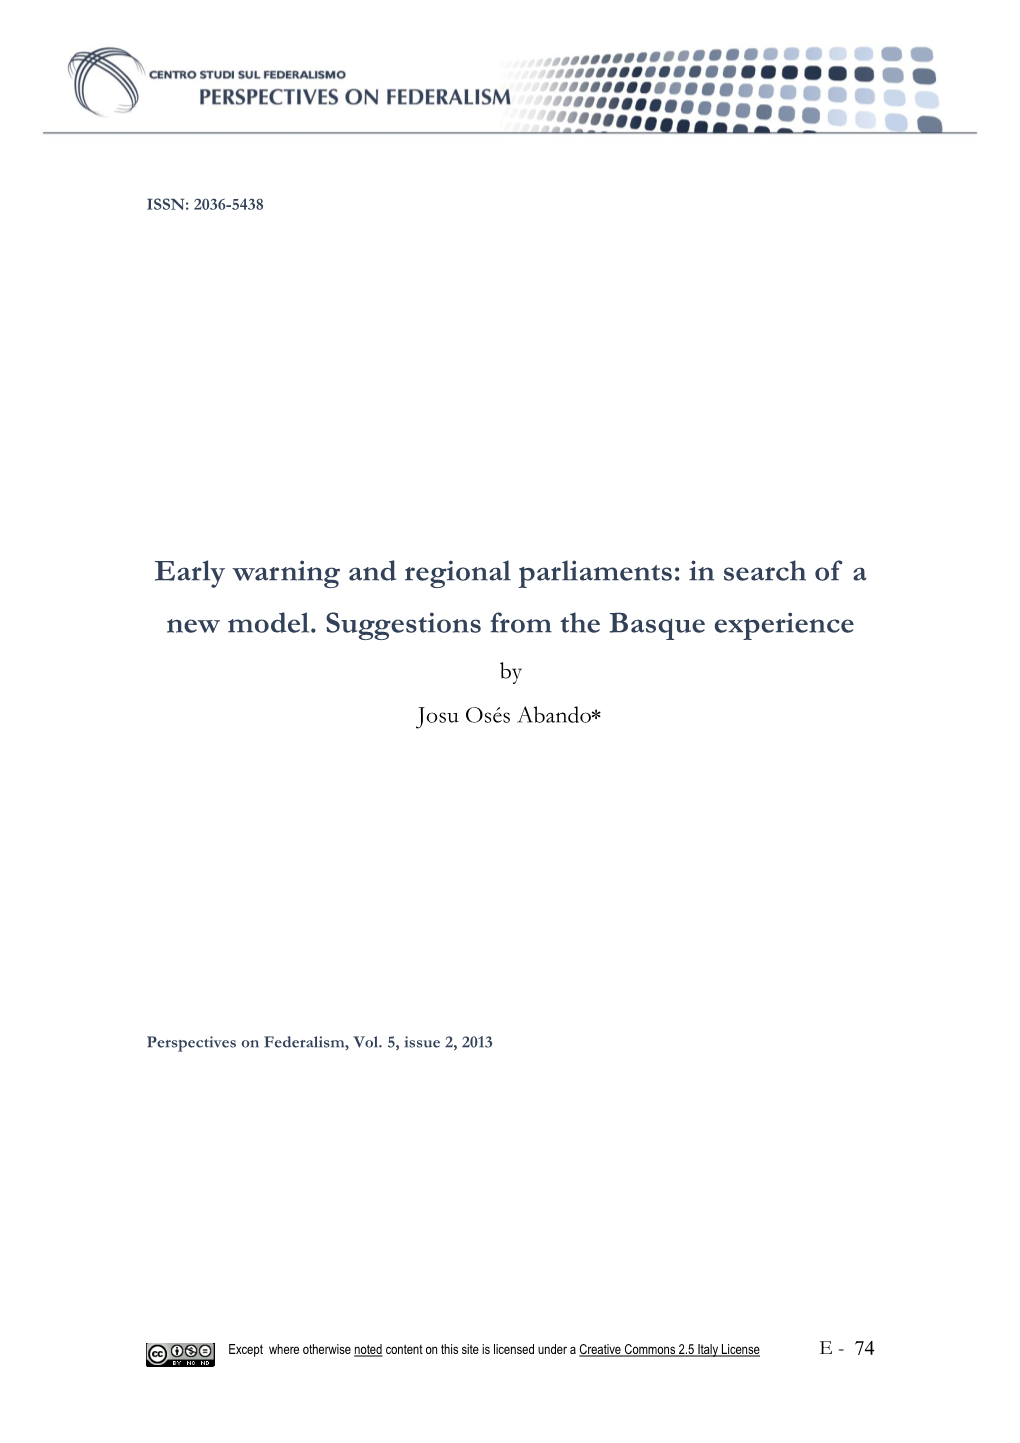 Early Warning and Regional Parliaments: in Search of a New Model